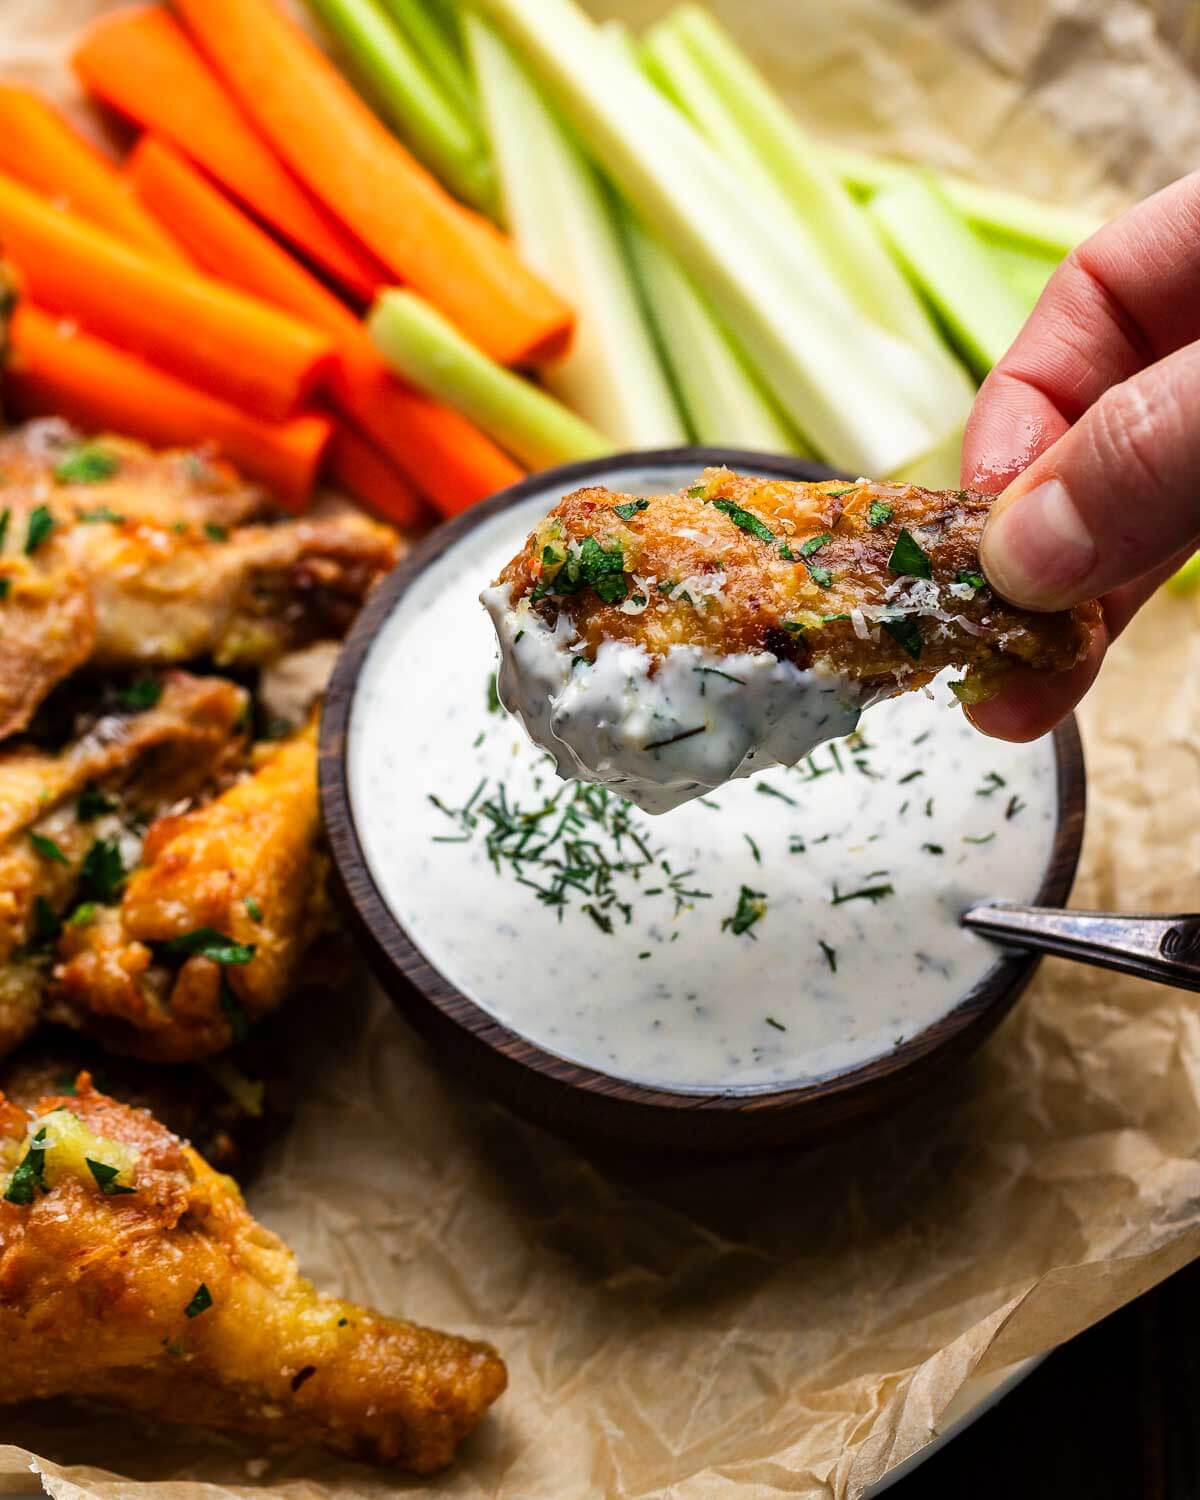 Hands dipping chicken wing into ranch dressing.